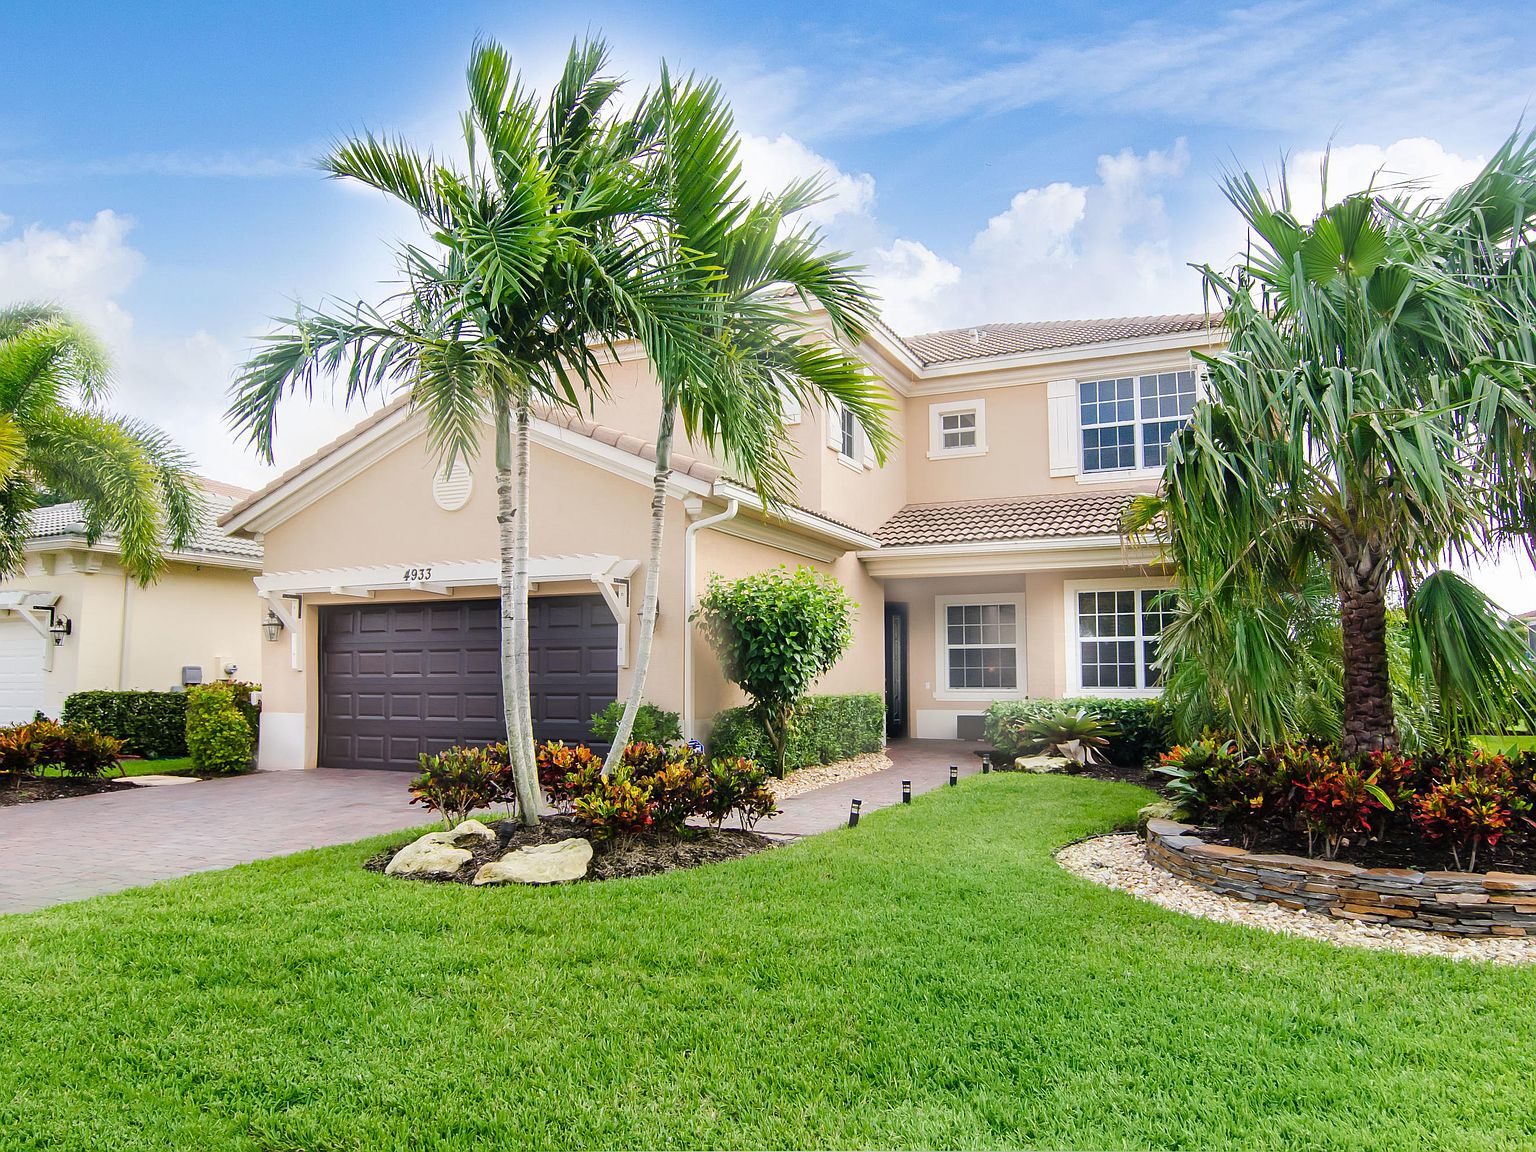 4933 Pacifico Ct Palm Beach Gardens Fl 33418 Zillow